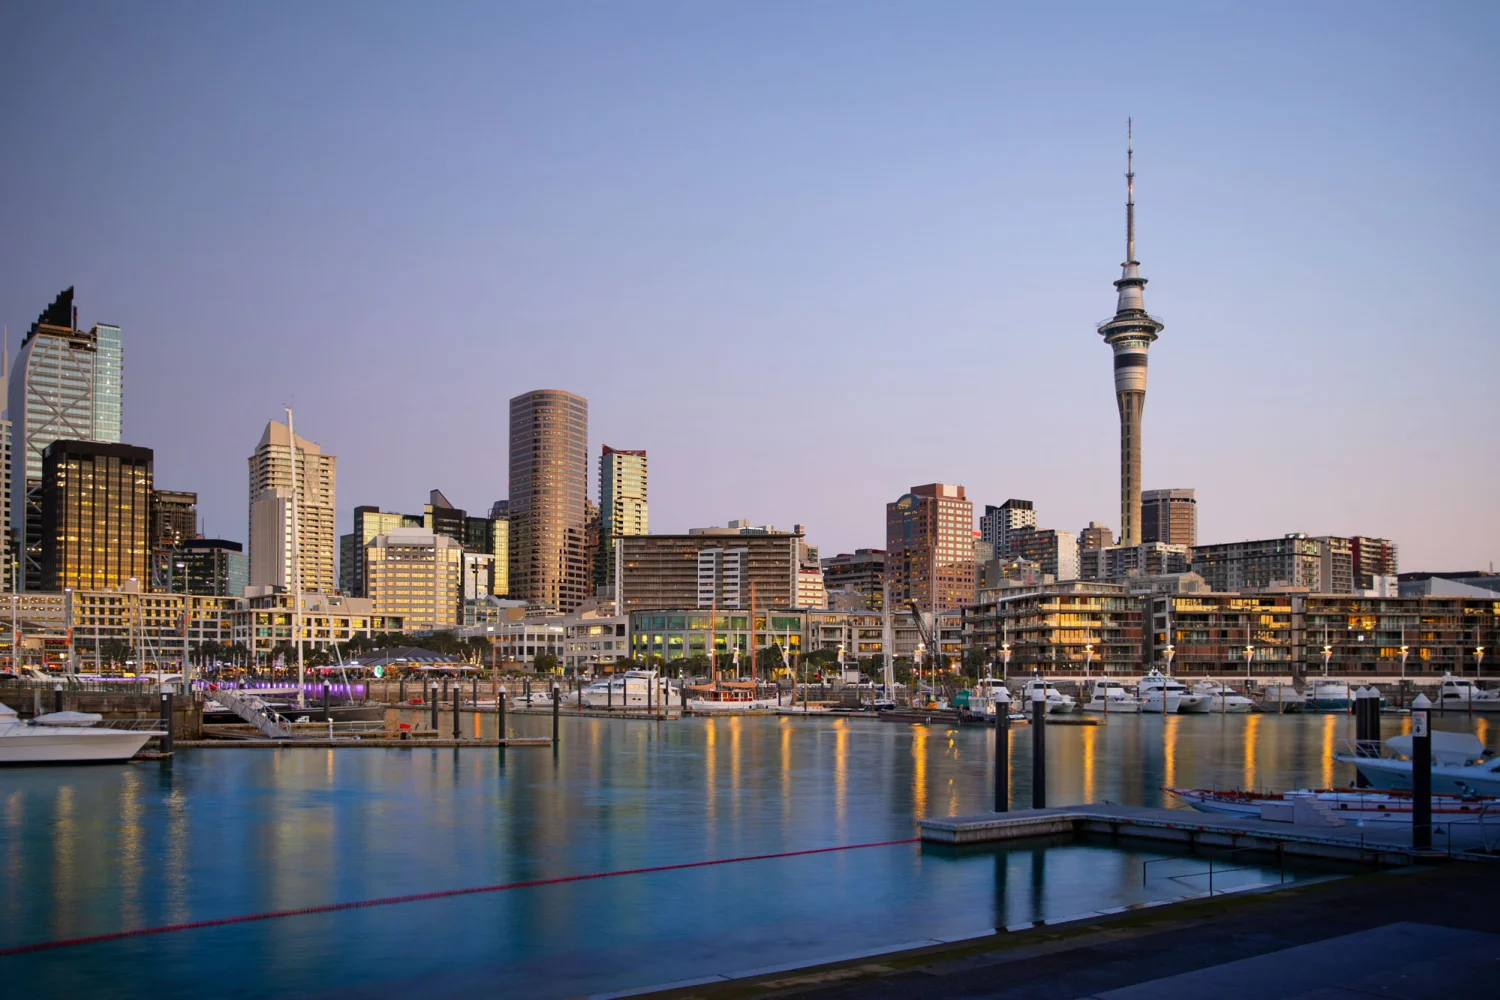 Auckland - Viaduct Harbour at dusk - New Zealand